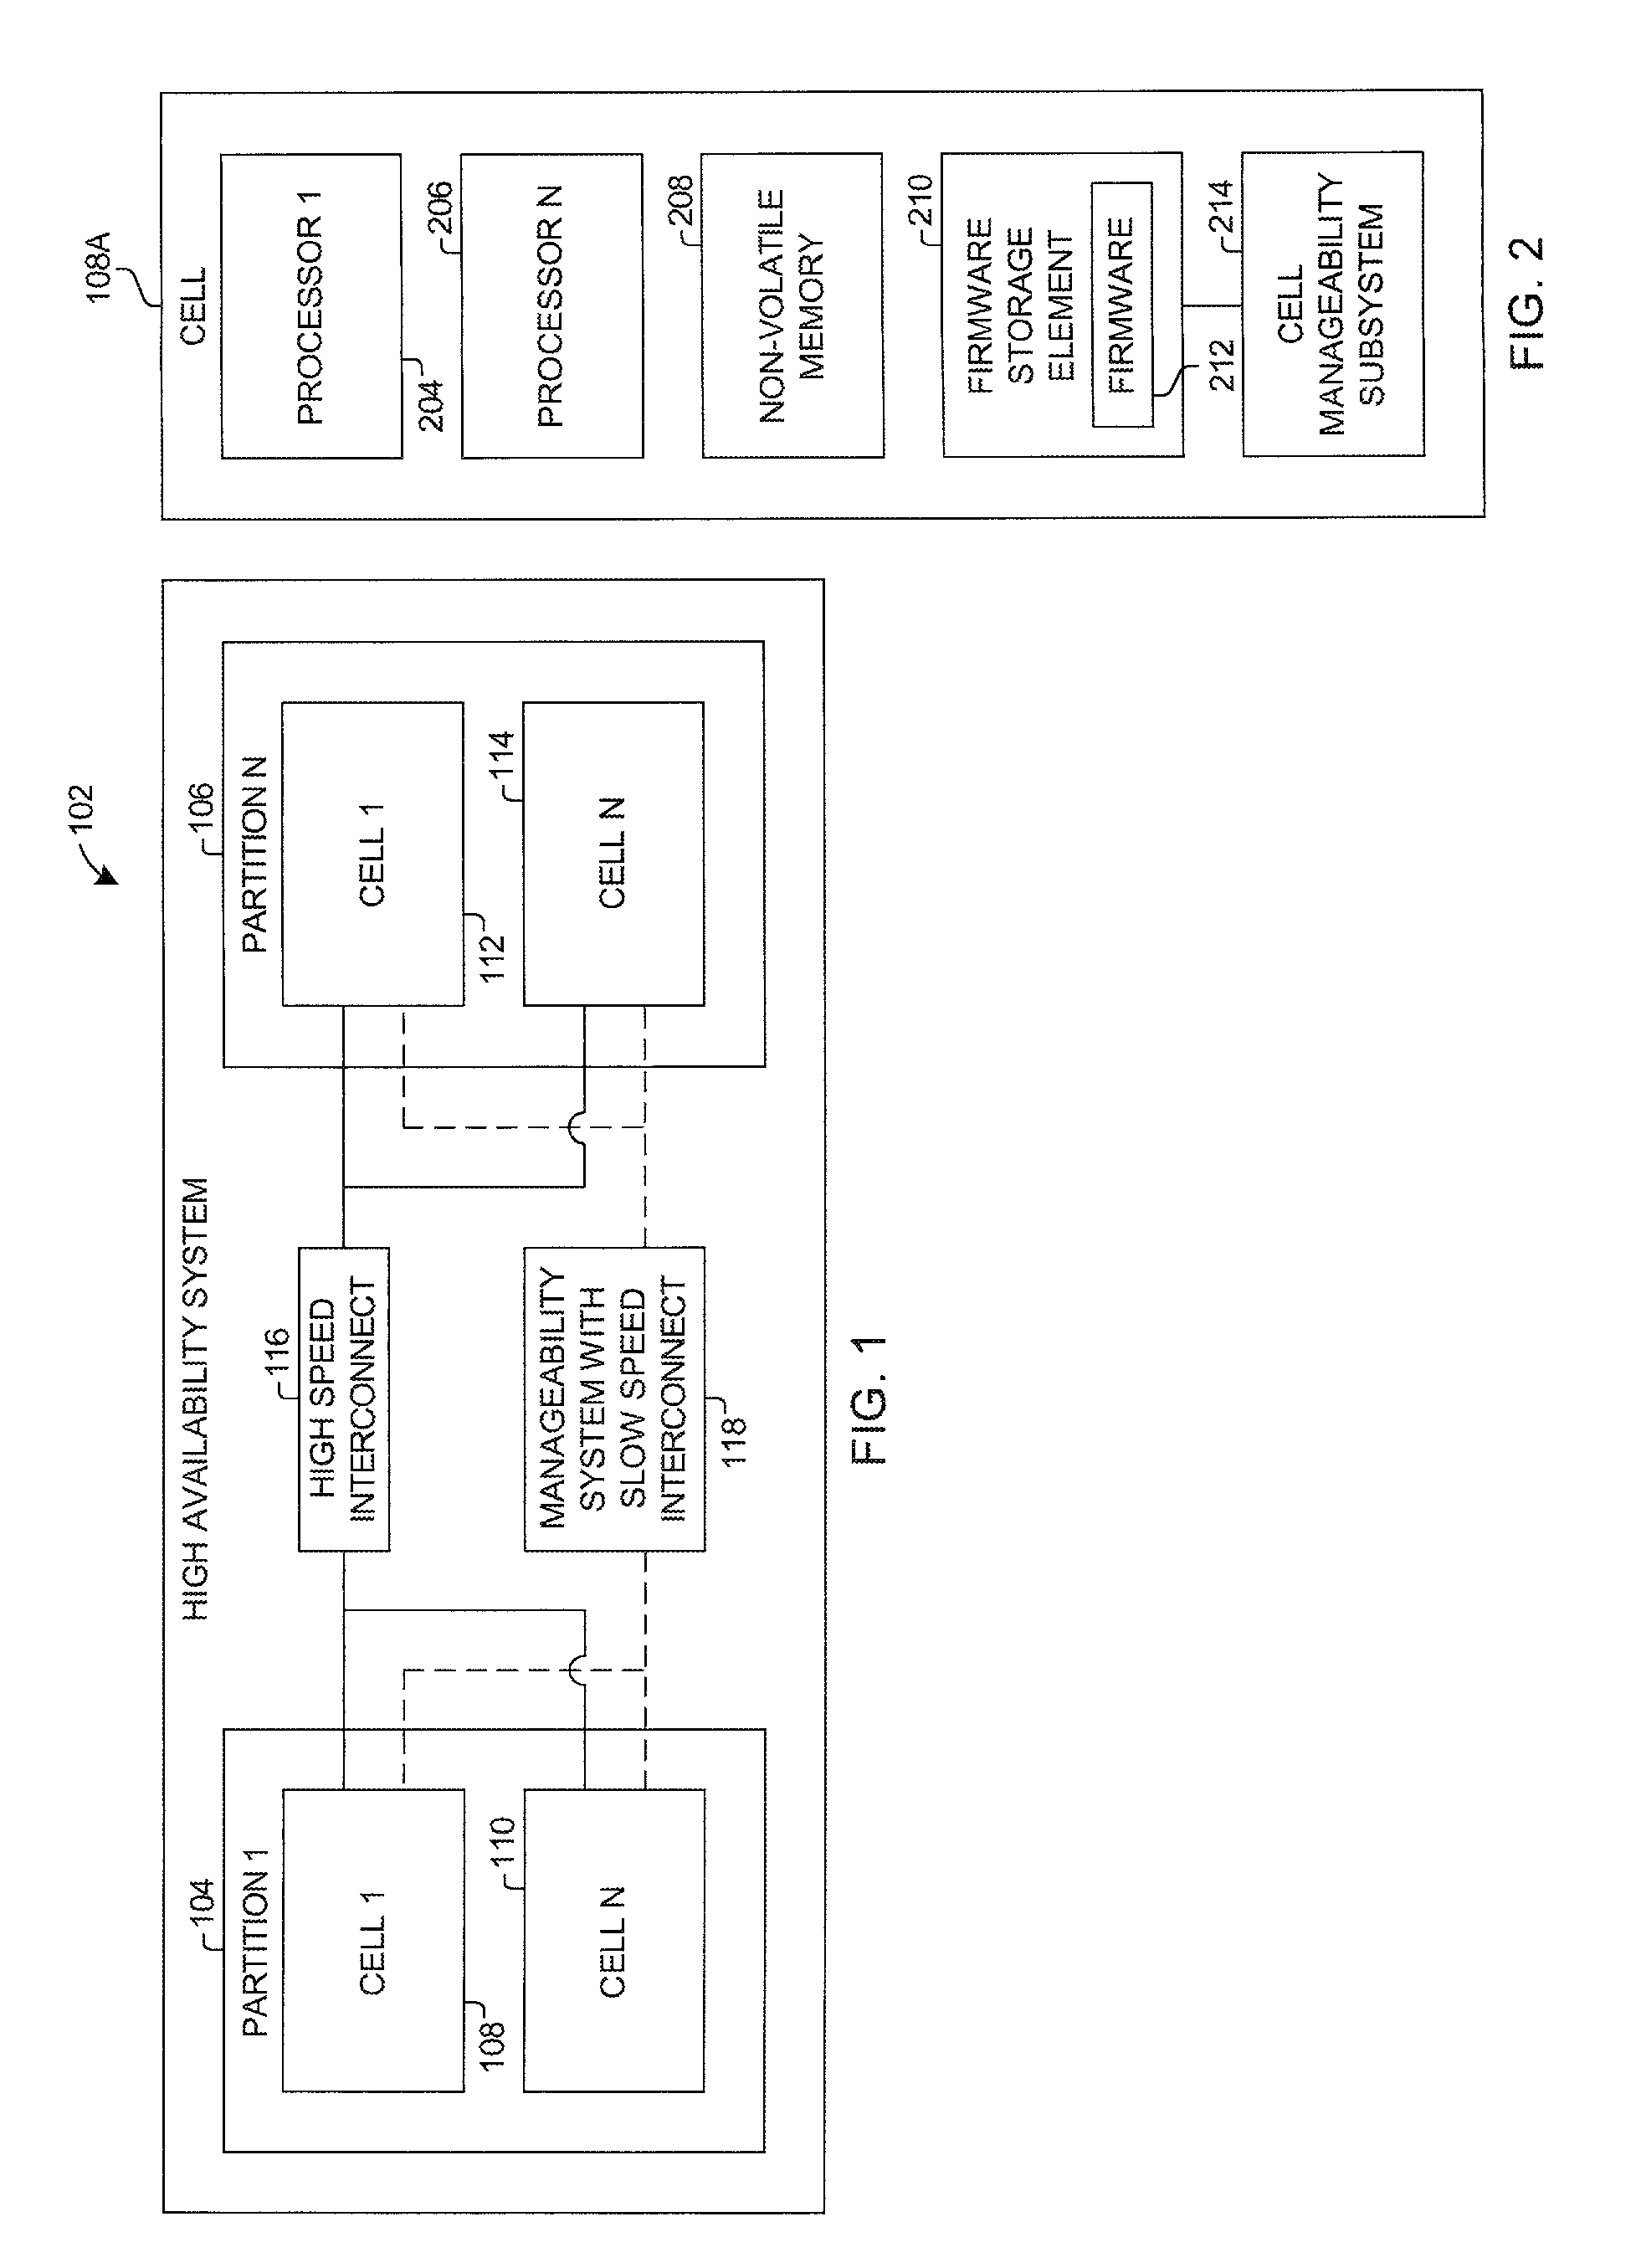 System and method for high availability firmware load